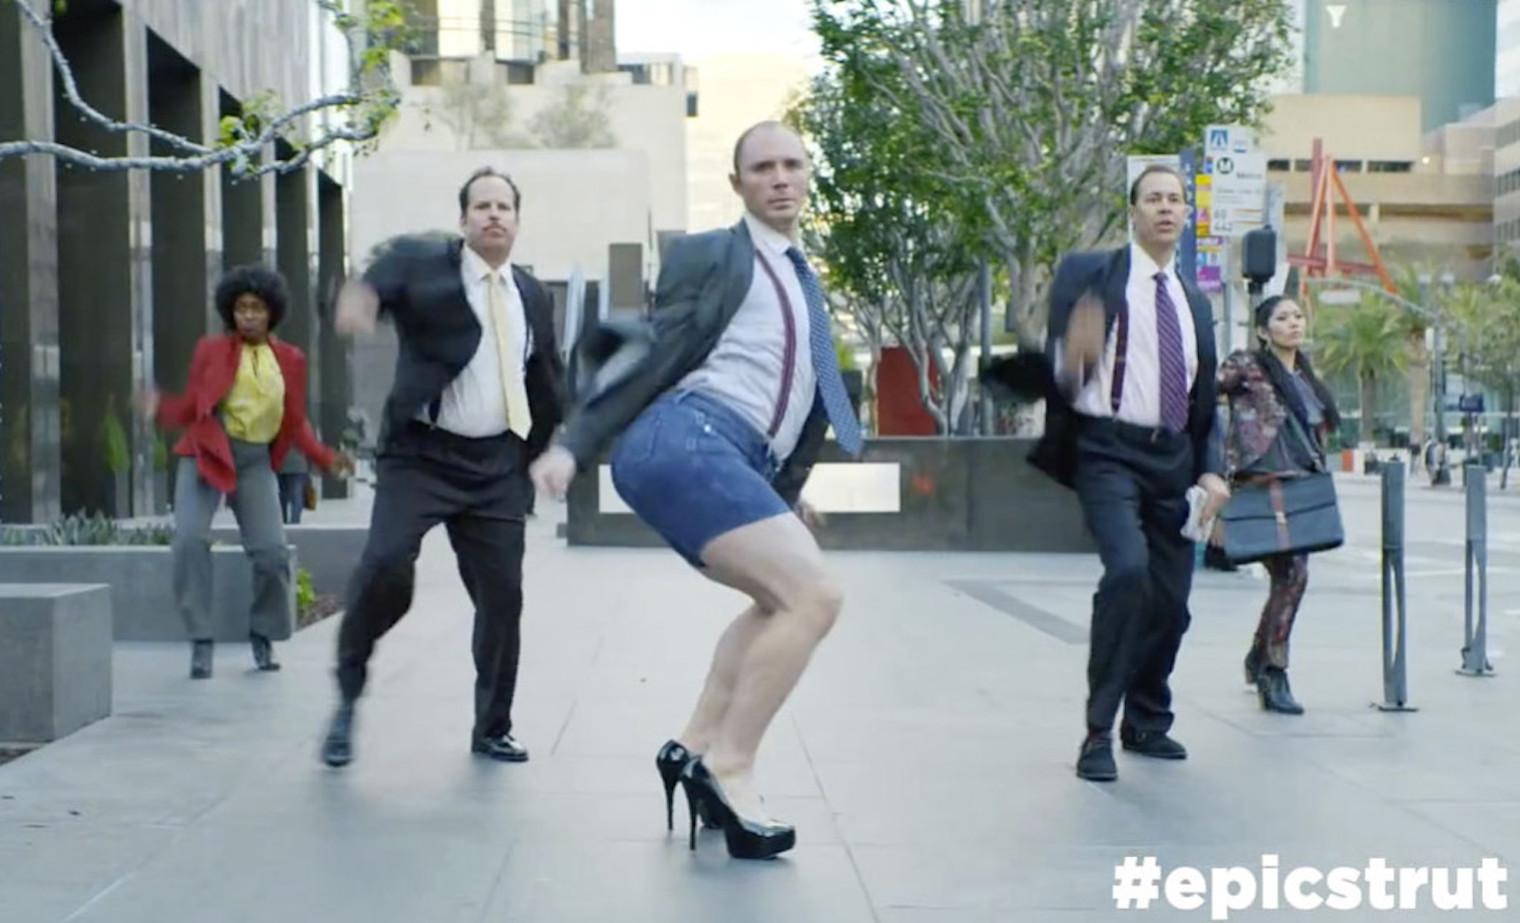 MoneySupermarket's twerking campaign. Could this be combined with its latest ads featuring Skeletor?